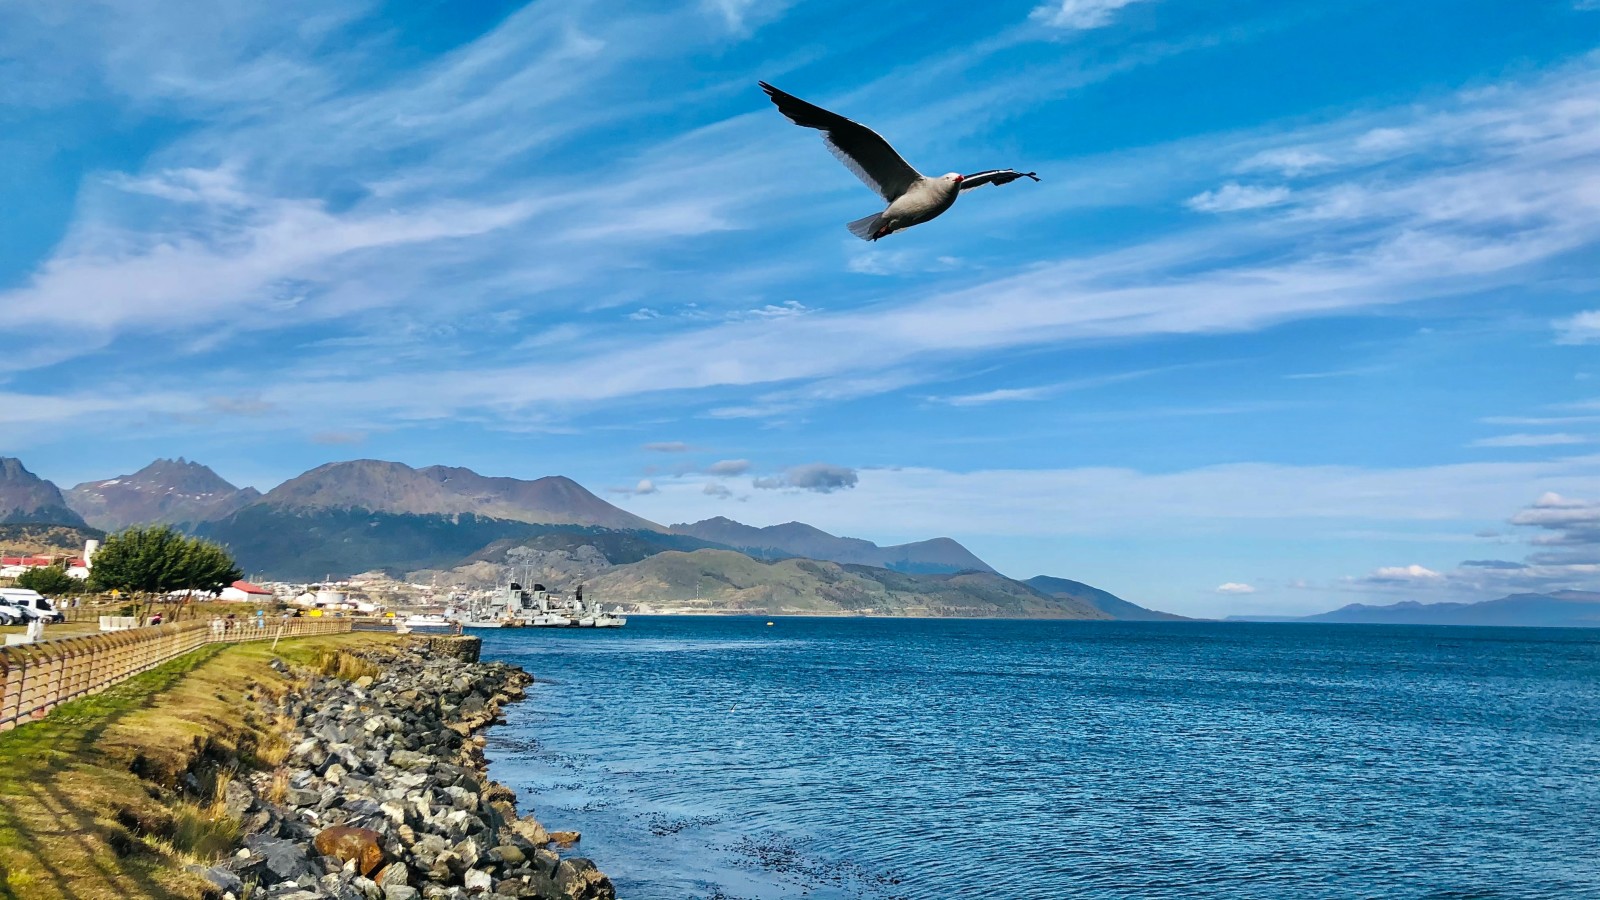 A white and black bird flying above a blue lake with white rocks and green grass bordering, tall mountains in the background in Ushuaia, Argentina.